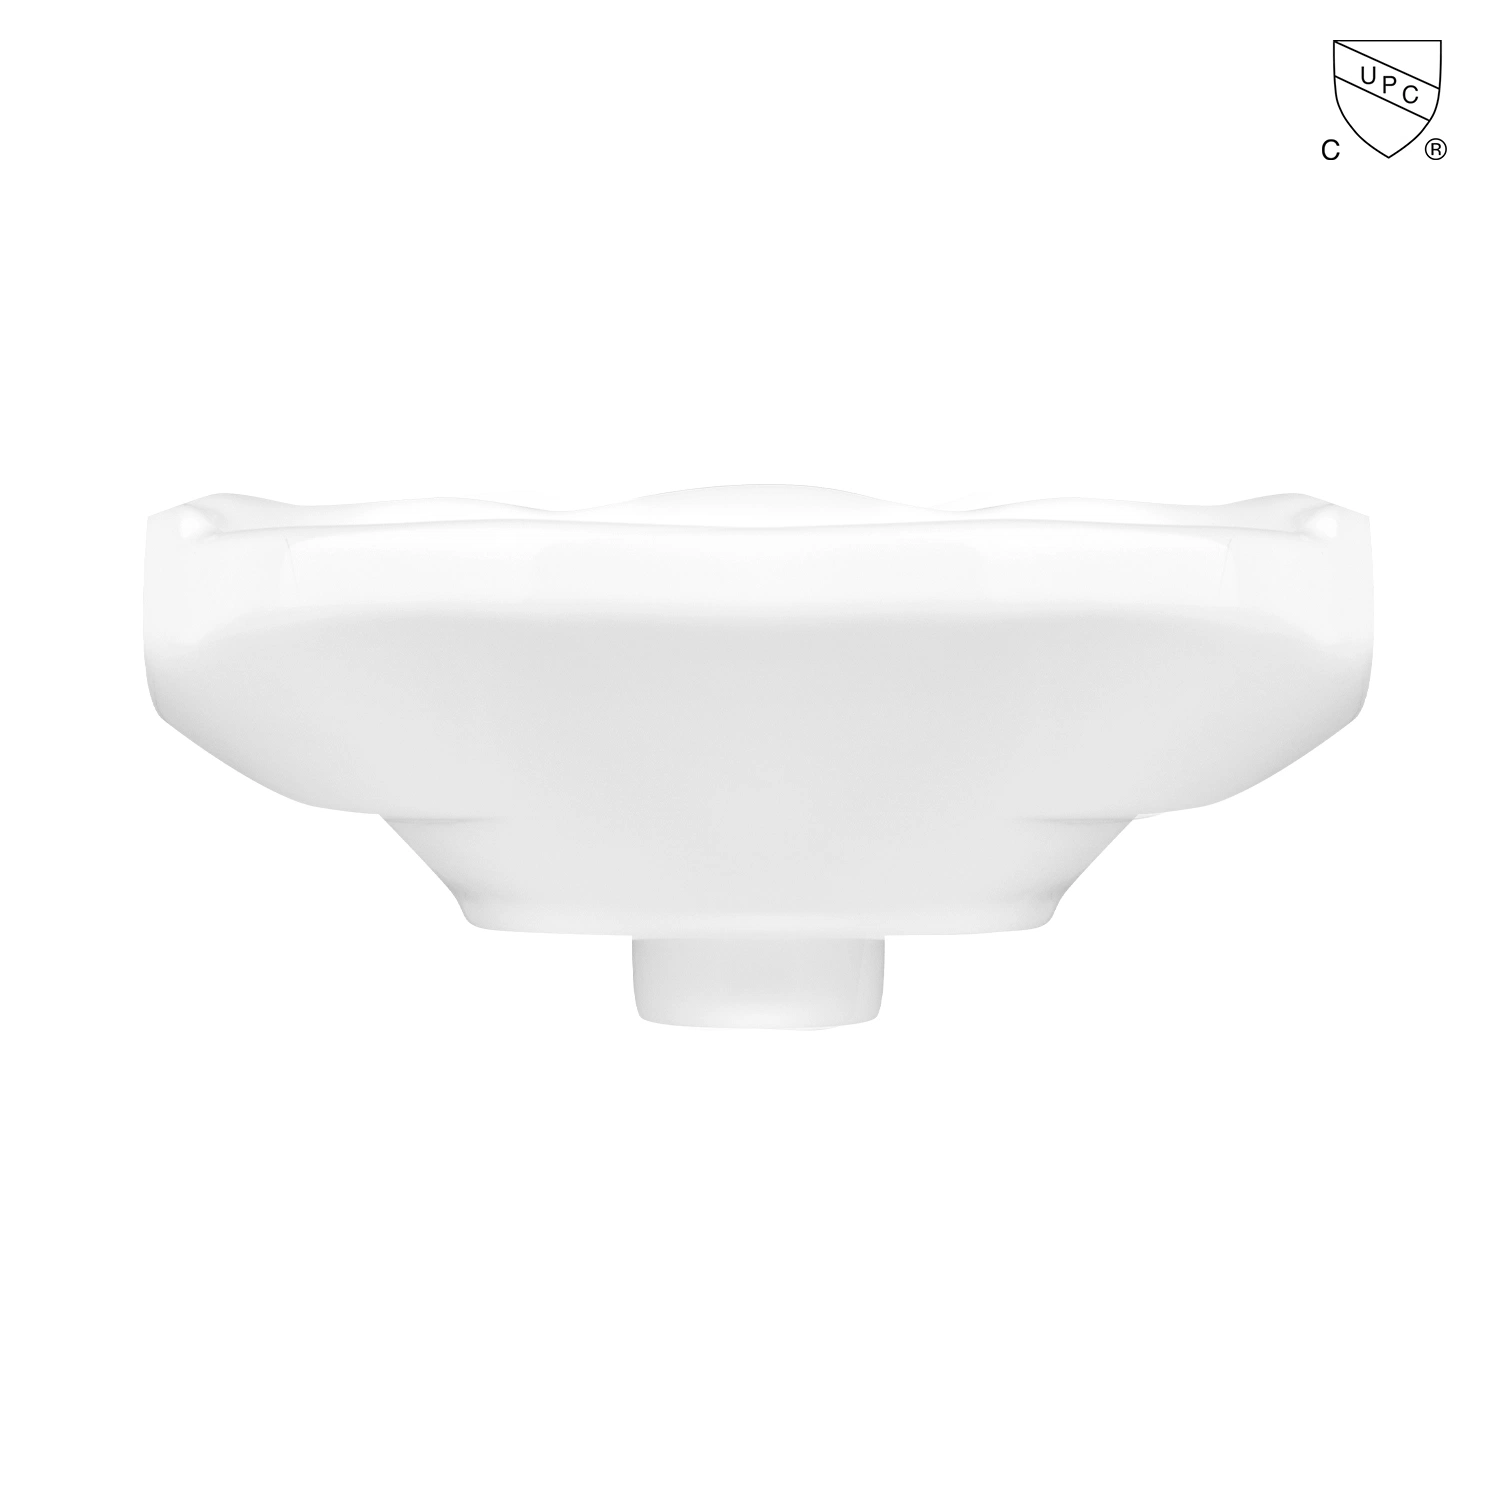 Bathroom Glassy White Oval Ceramic Porcelain Sanitary Ware Vanity Hot Sale Wall-Mount Furniture with Pre-Drilled Overflow